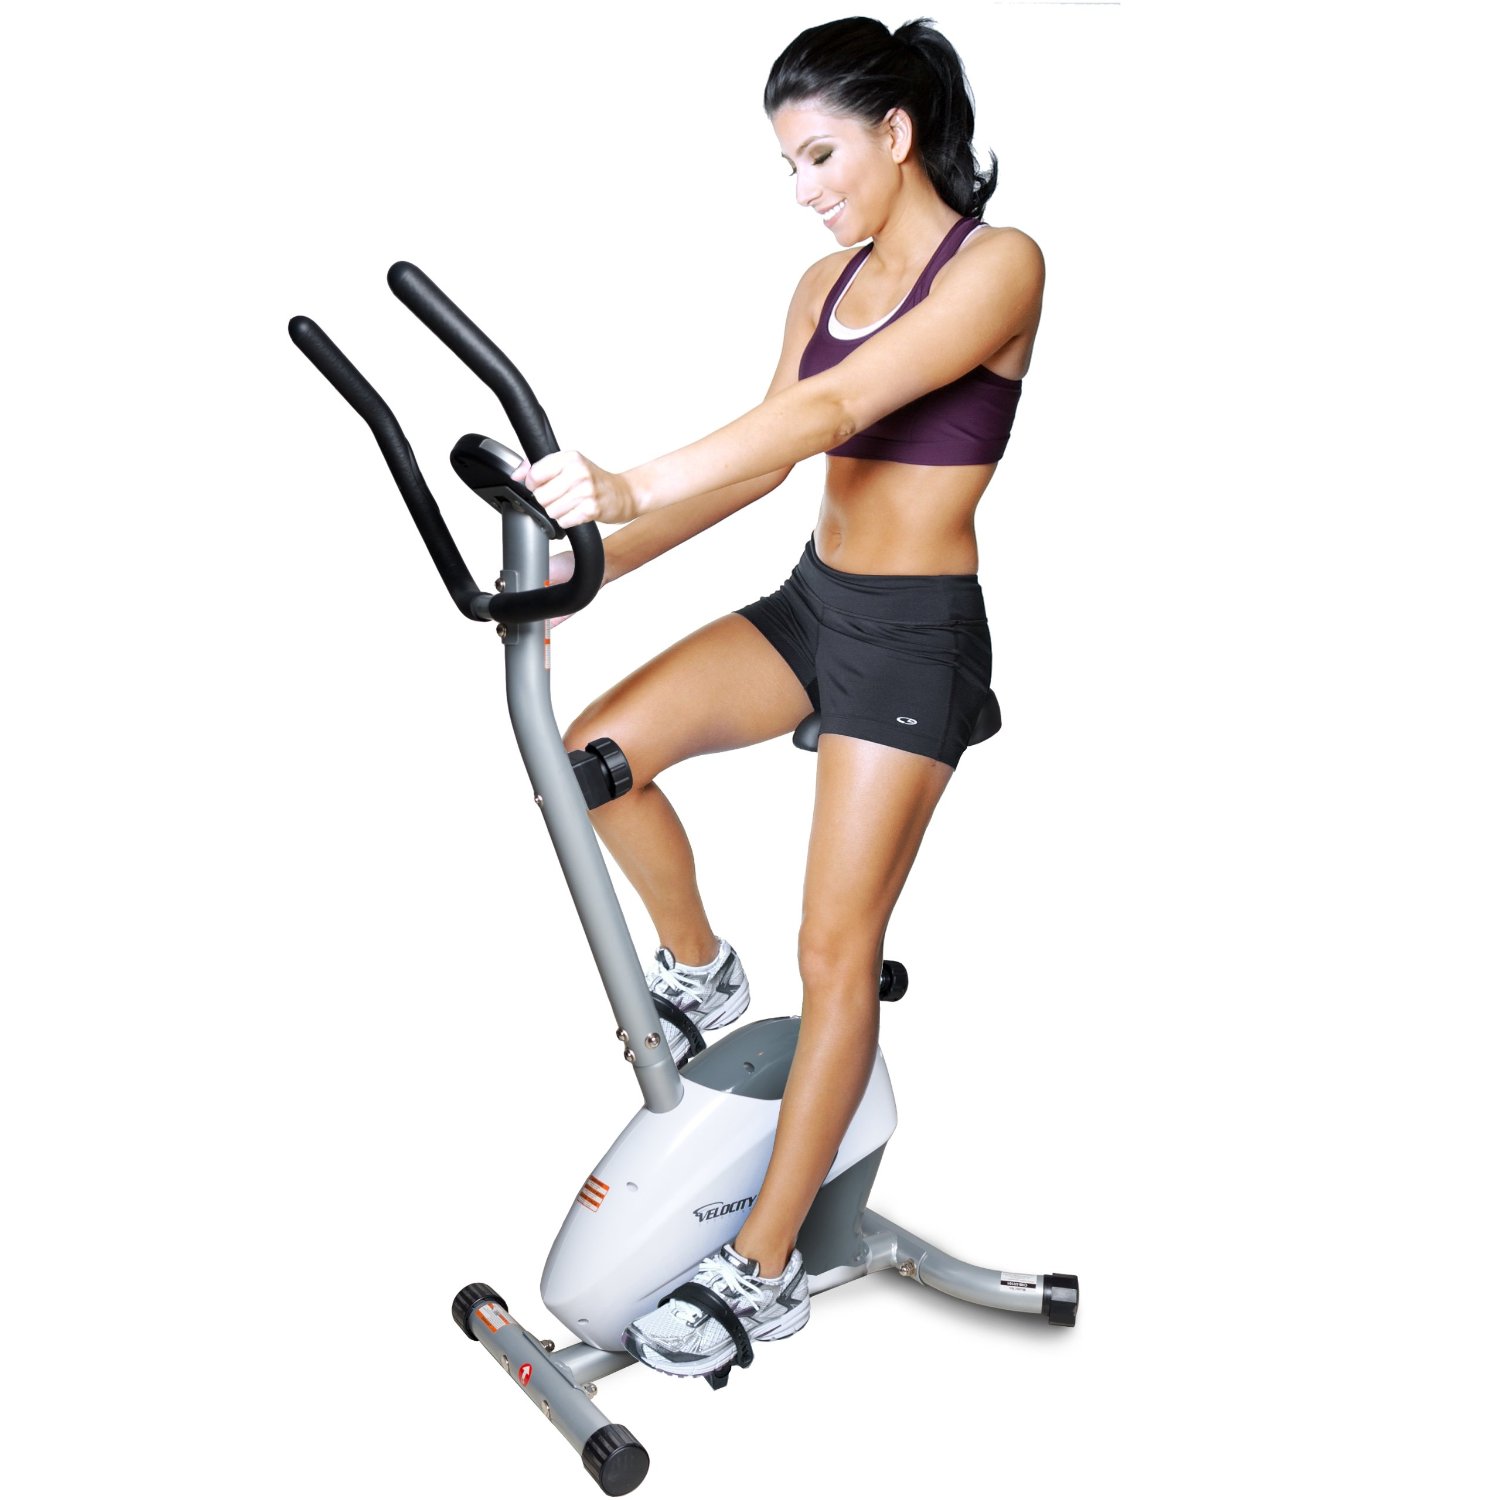 Top 5 reasons an exercise bicycle is the best fitness machine